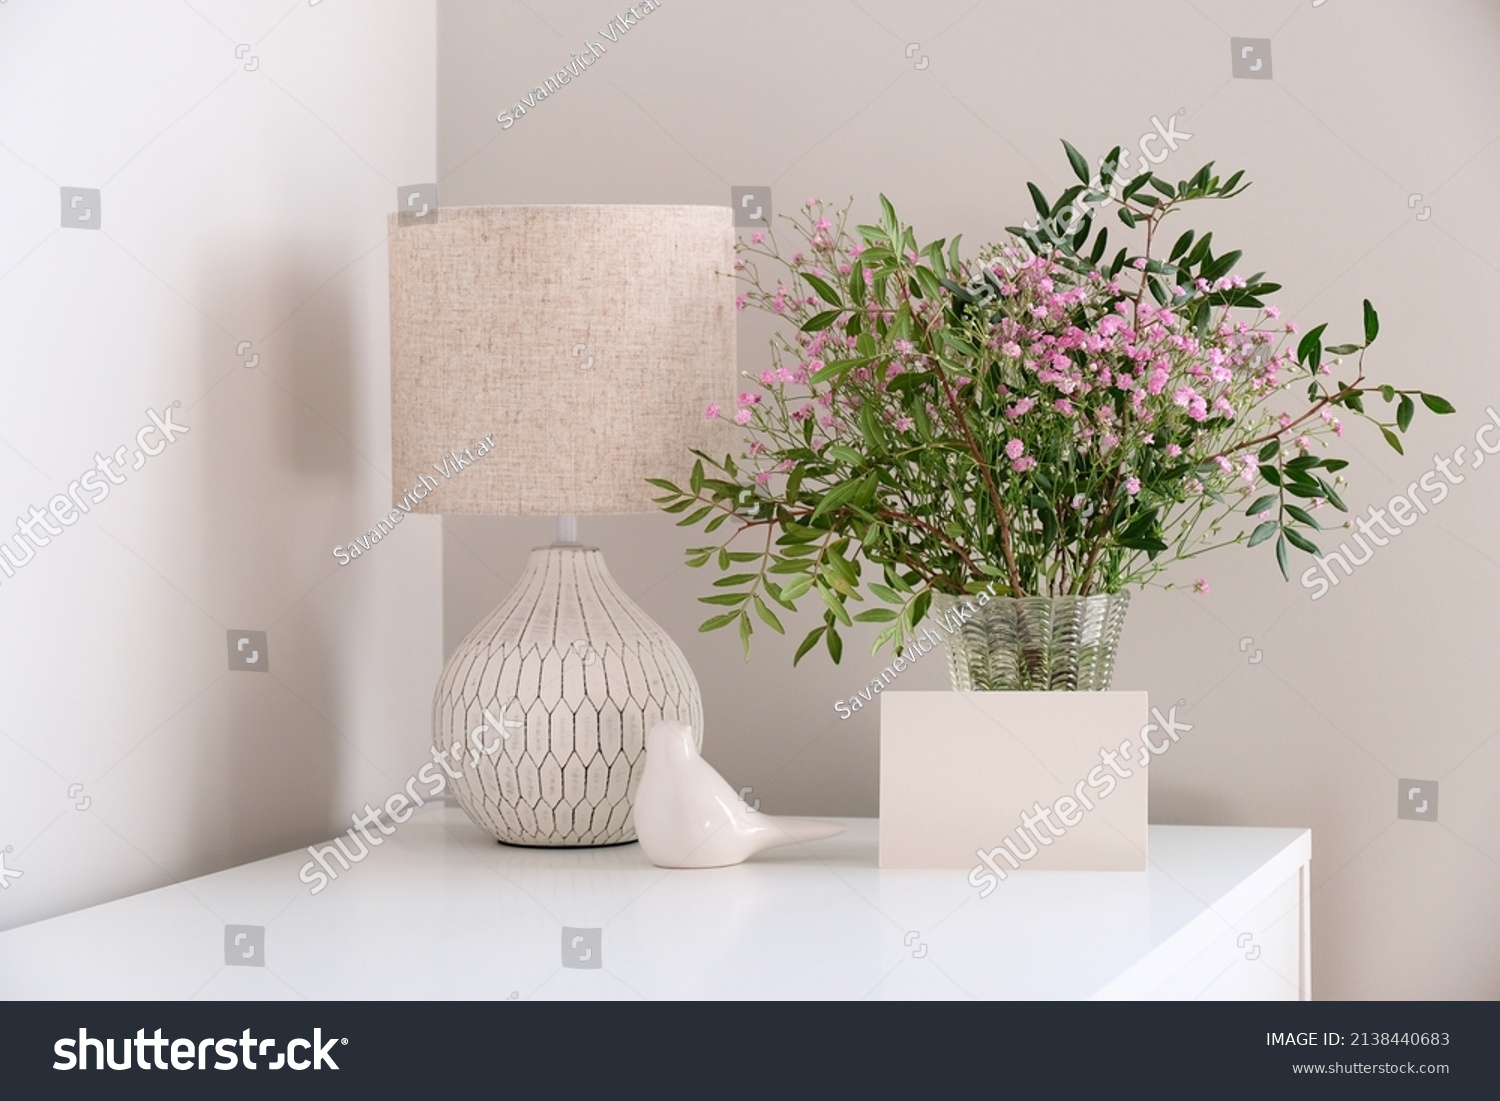 Cozy home desk table with lamp, bunch of spring flowers in vase, greeting card mockup. Hygge, boho style, scandinavian living room #2138440683